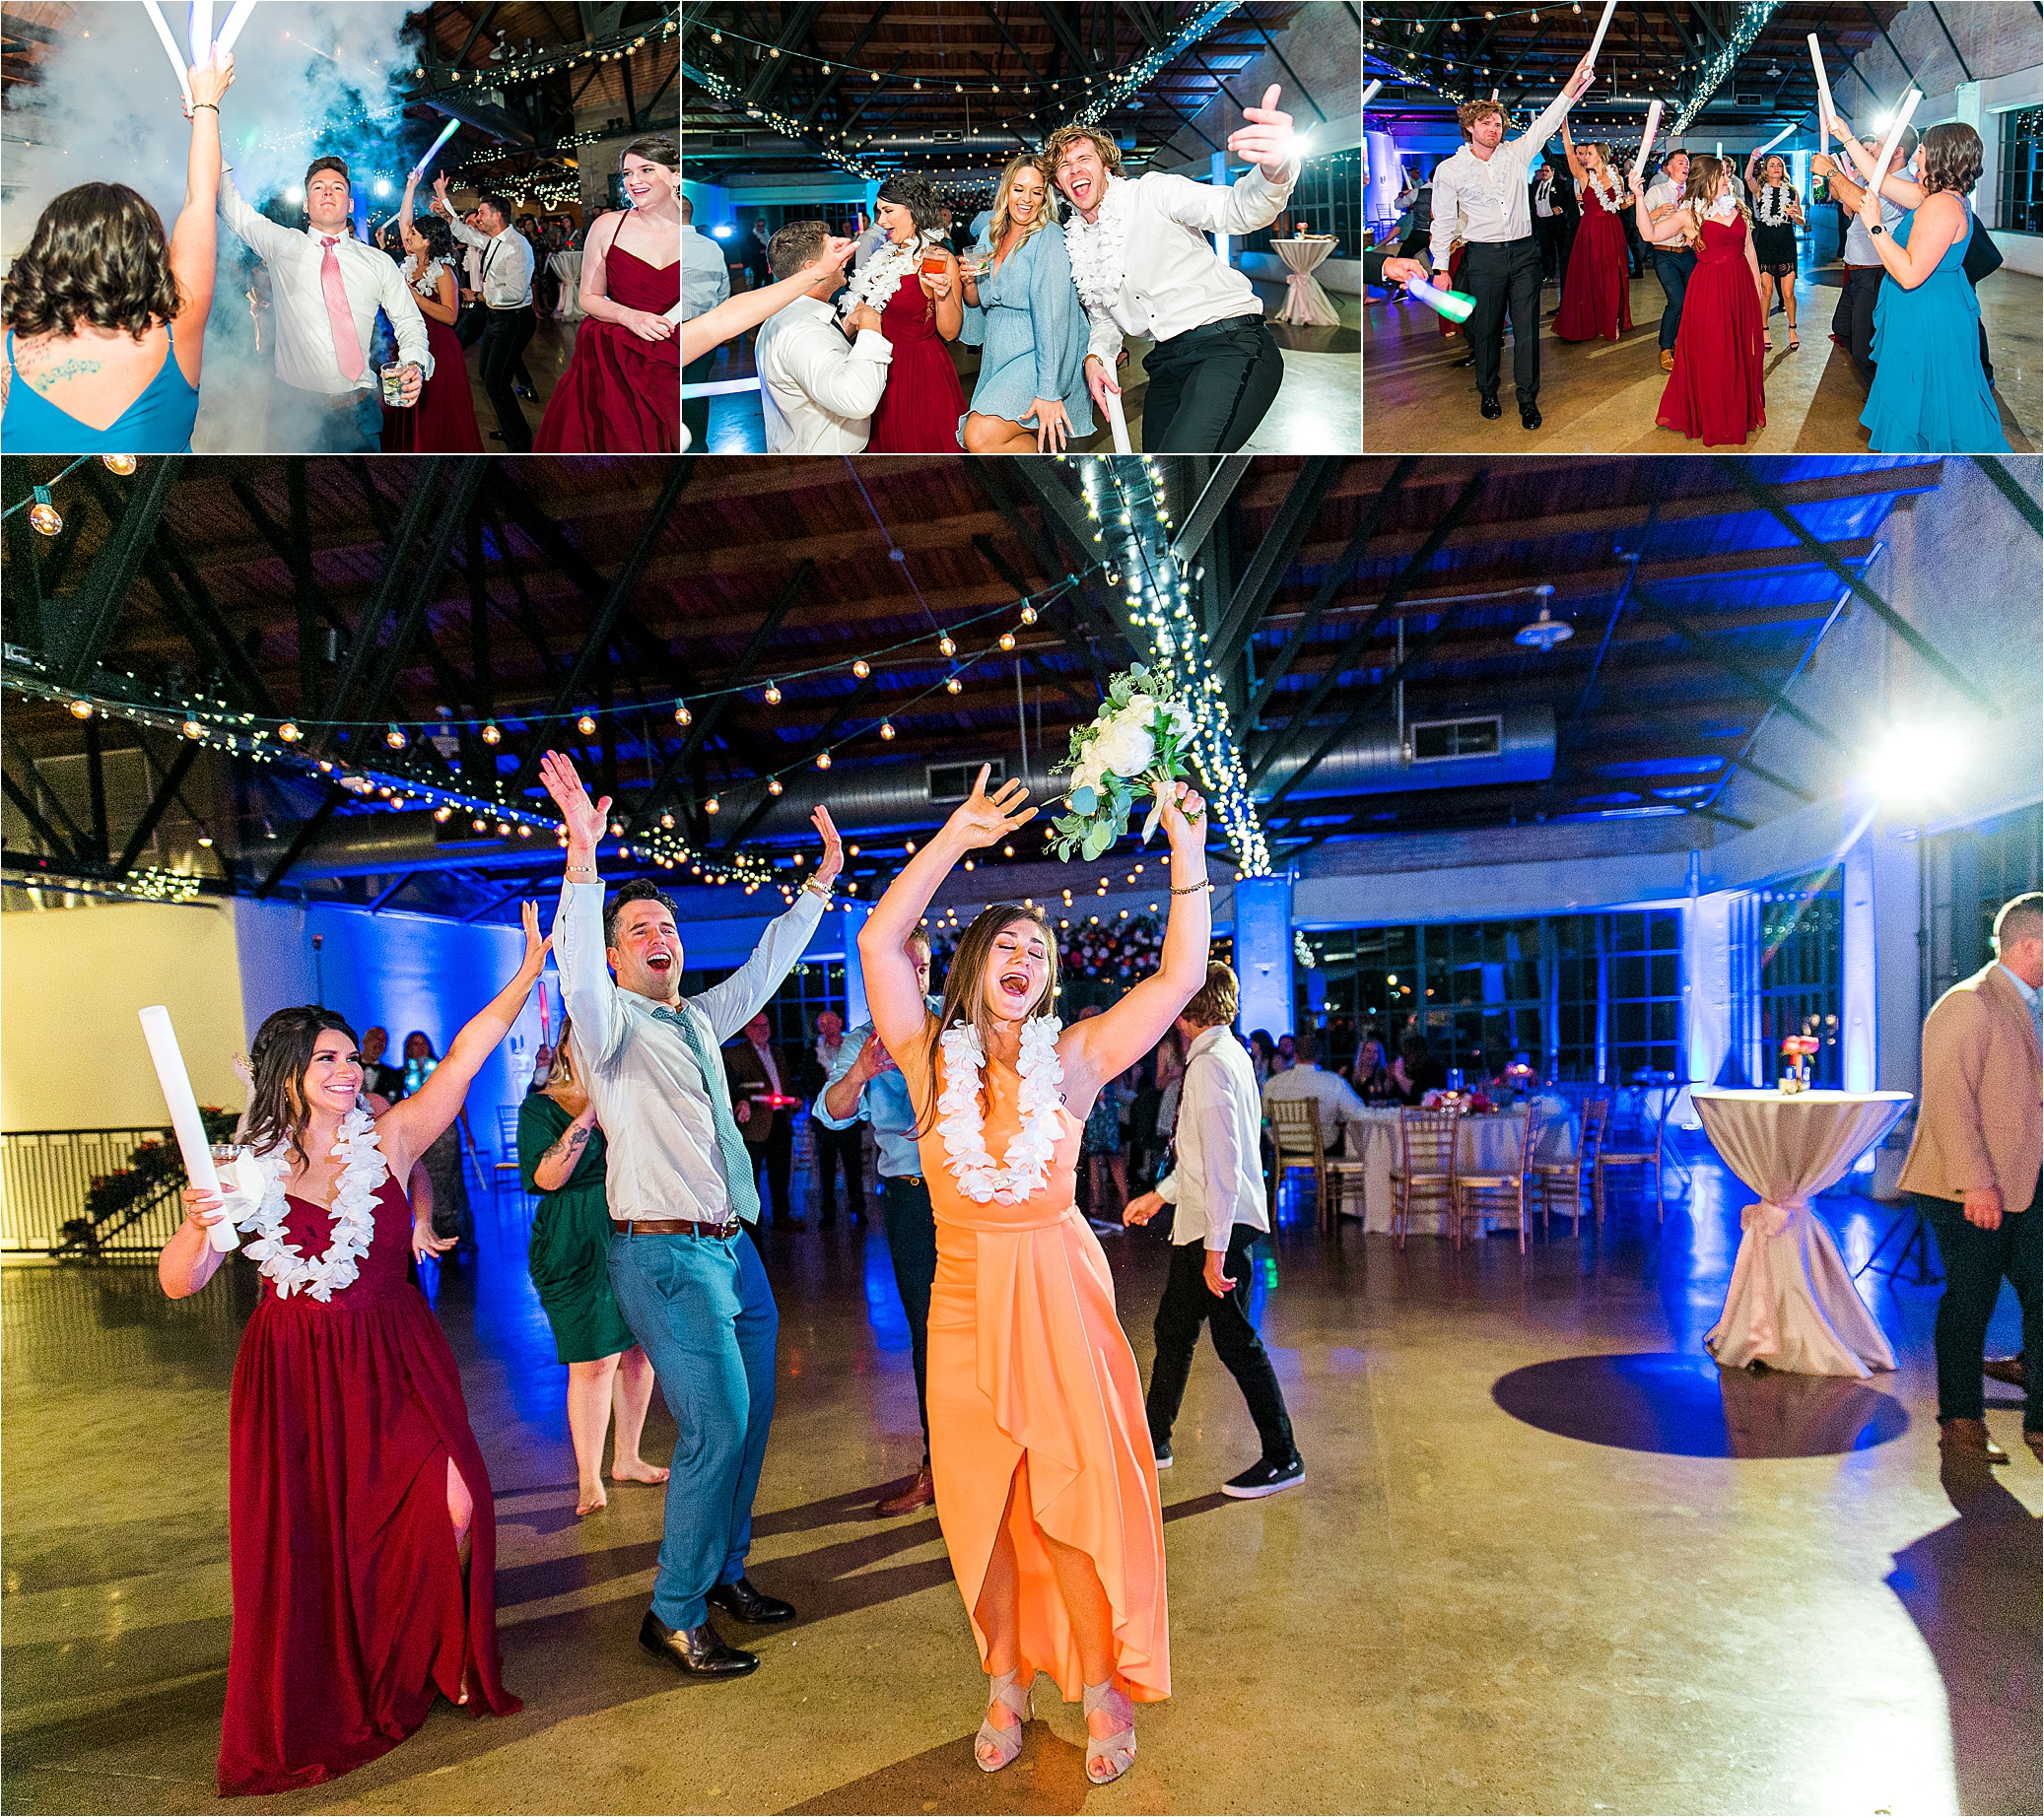 A guest is so happy as she waives her hand in the air catching the wedding bouquet at lively hickory street annex wedding reception in Dallas, Texas 